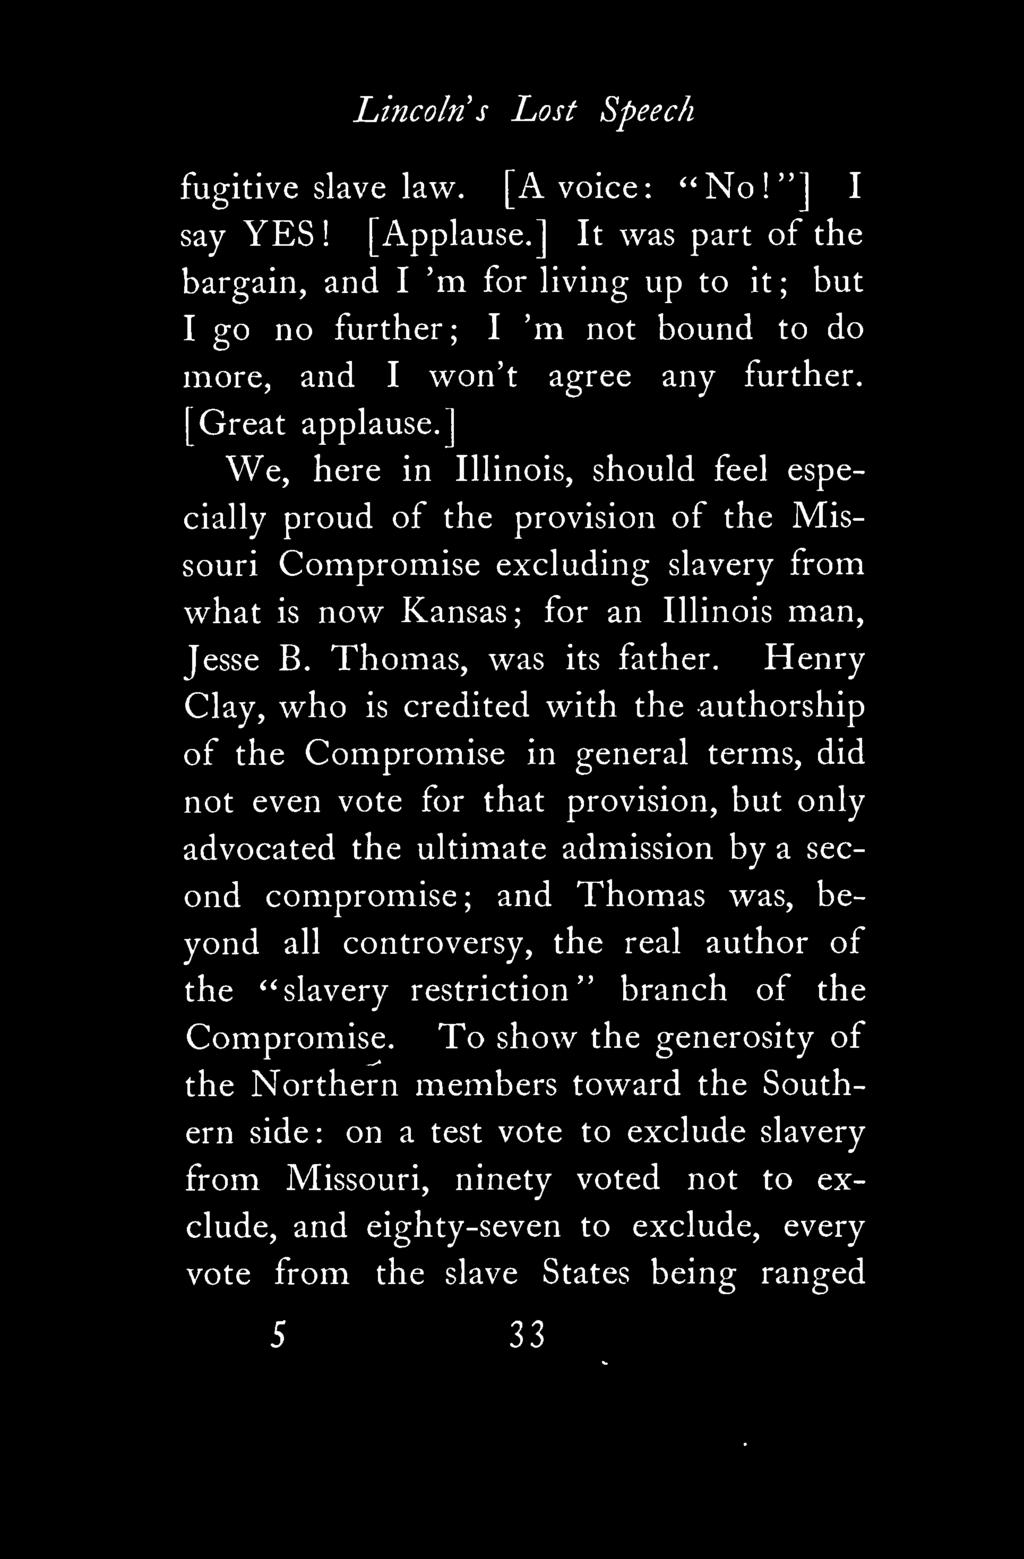 ] We, here in Illinois, should feel especially proud of the provision of the Missouri Compromise excluding slavery from what is now Kansas; for an Illinois man, Jesse B. Thomas, was its father.